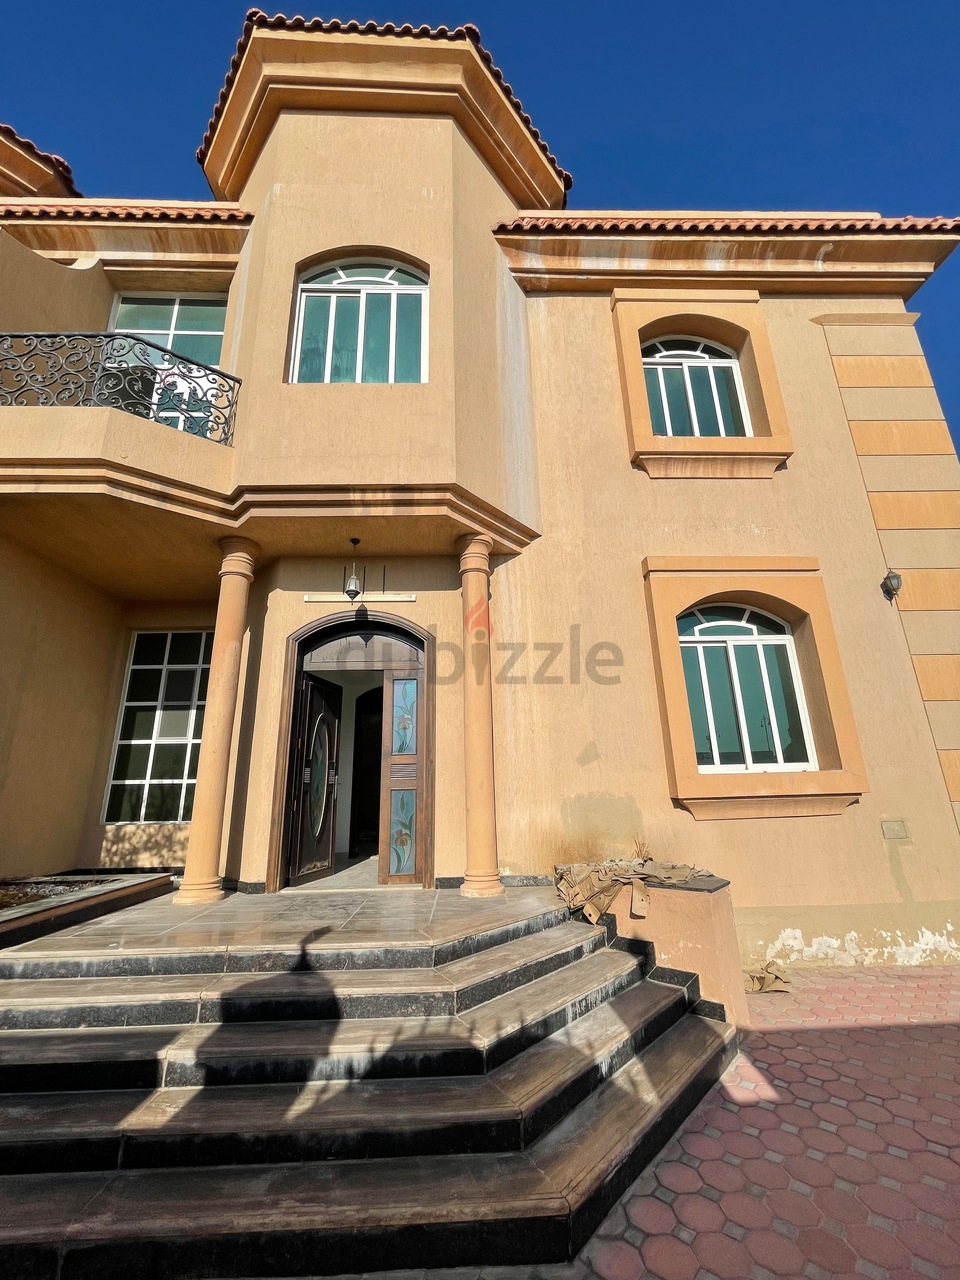 Lucky 4 Bedrooms Villa For Rent:95k 5000 Sqft Ready To Move